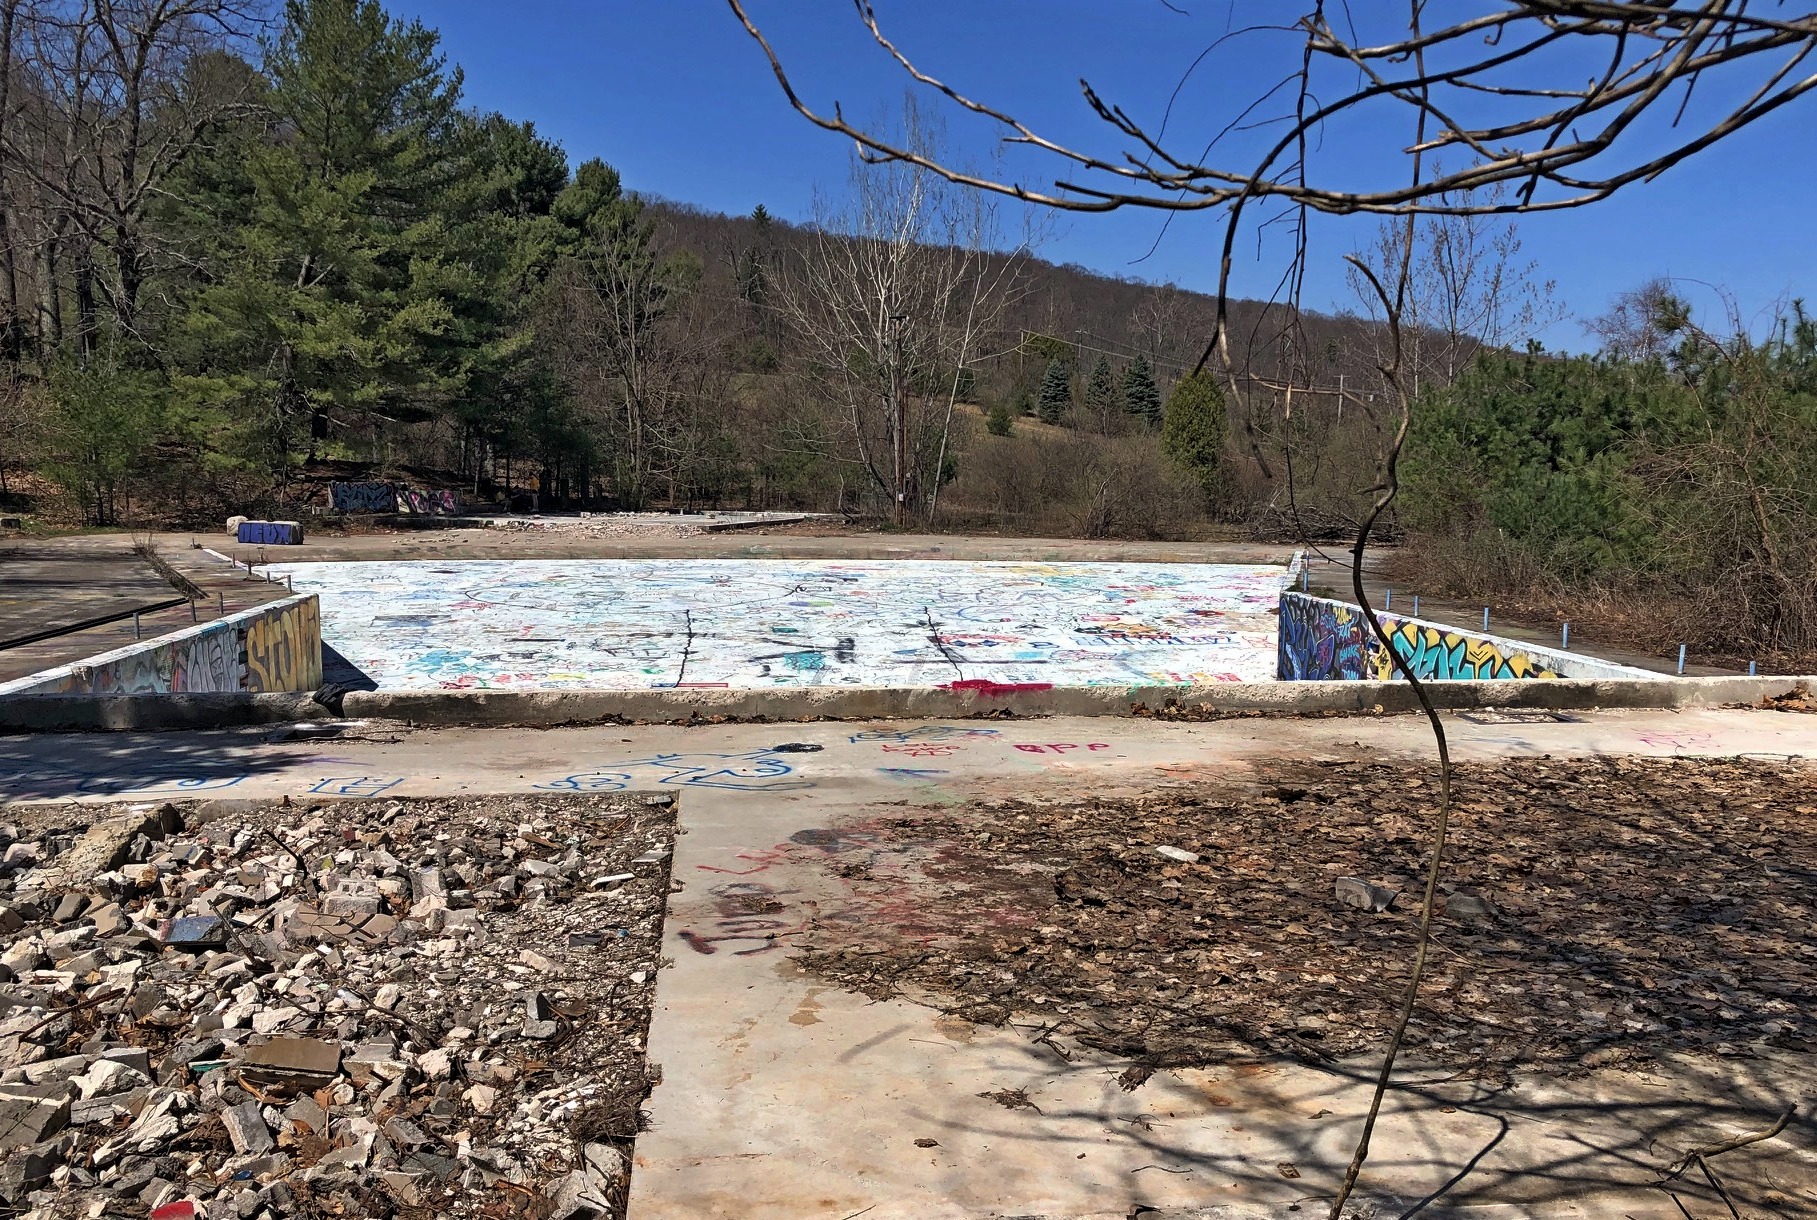 Site of the former wave pool at Mt. Tom ski area. It's now used mostly by skateboarders if it is used at all.